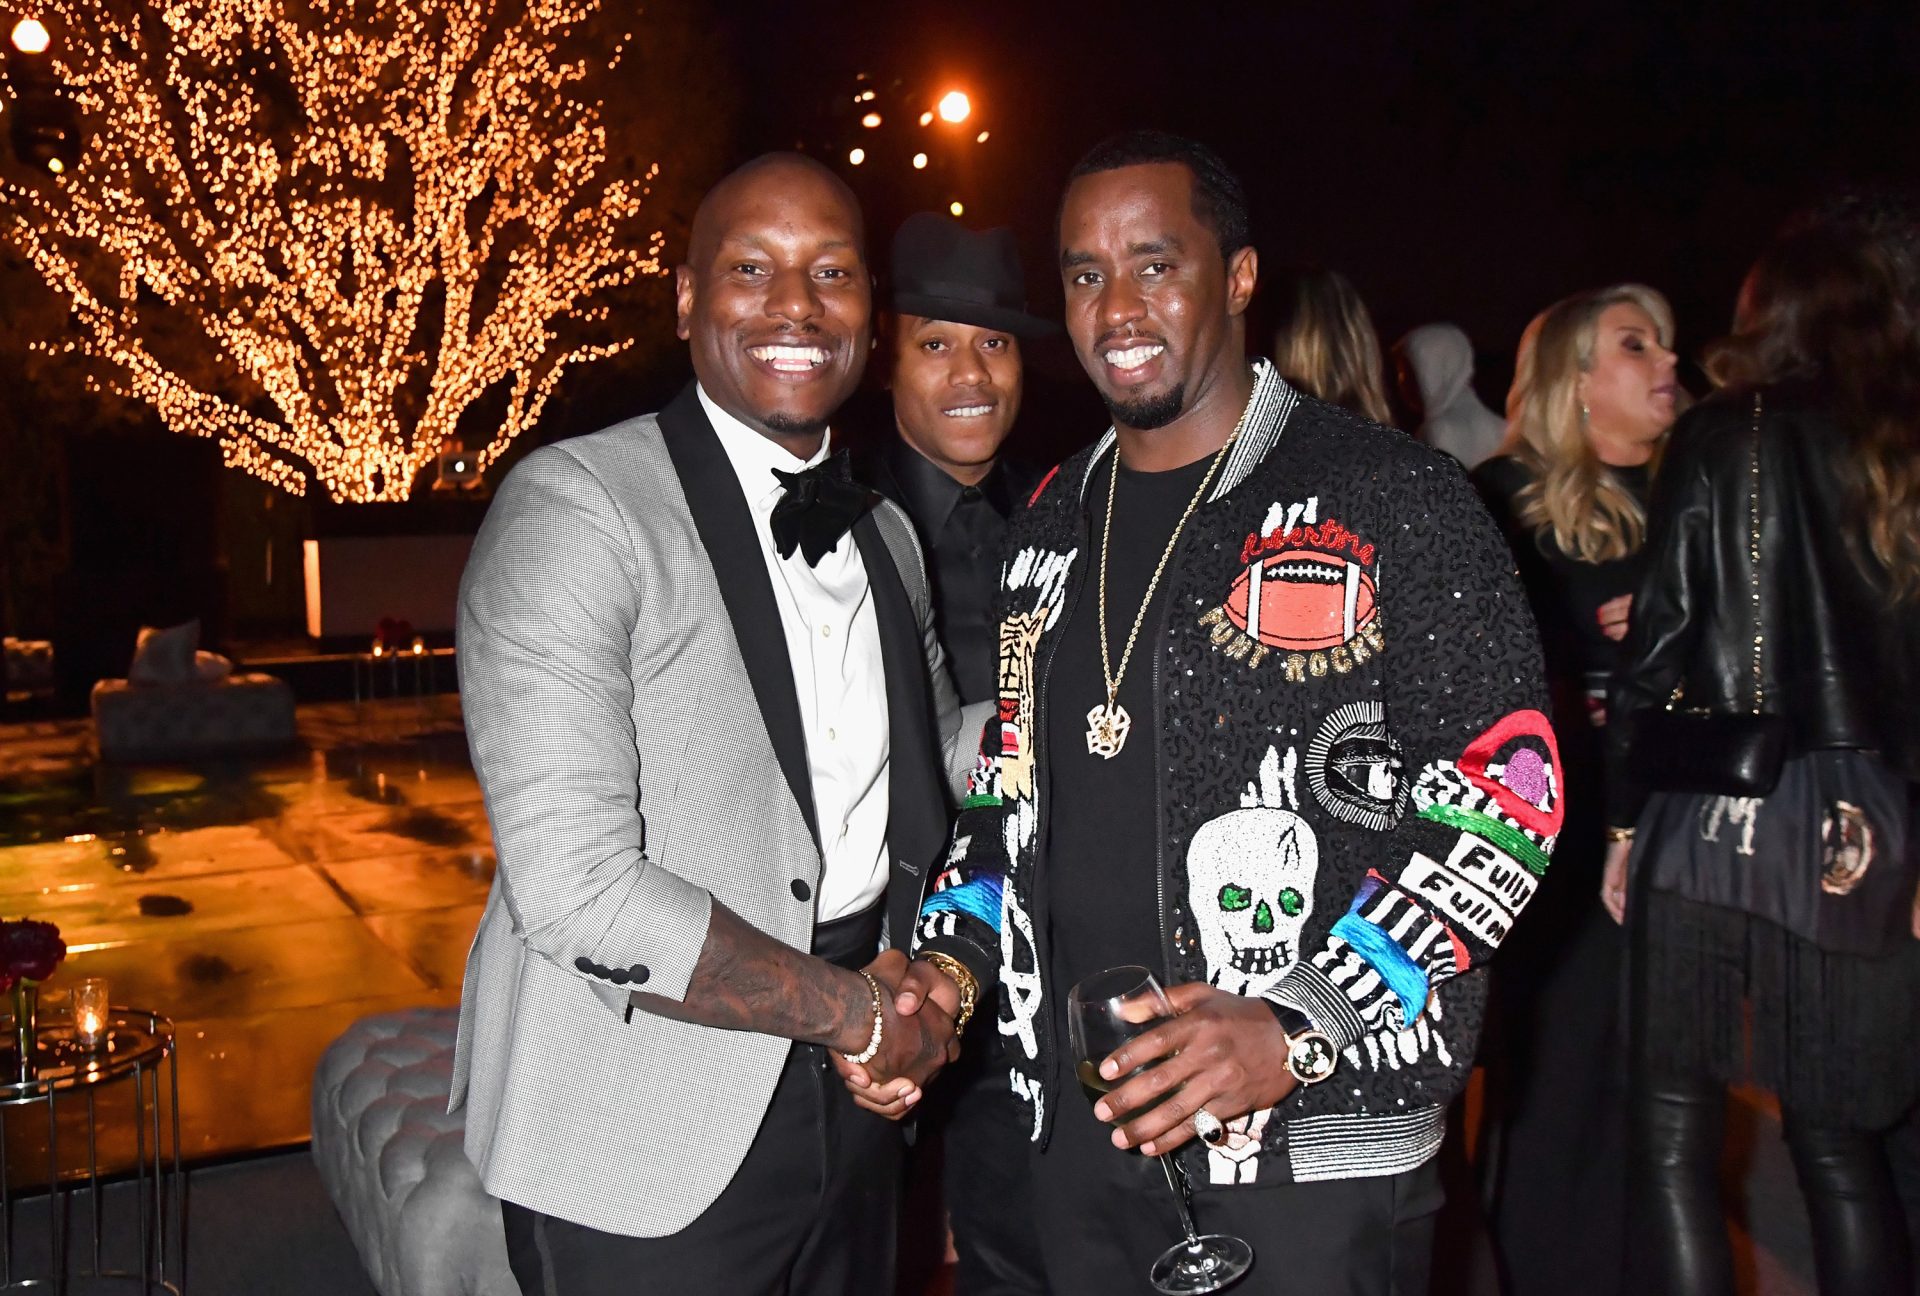 LOS ANGELES, CA - JUNE 21: Tyrese Gibson and Mario Winans toast to Sean "Diddy" Combs and the world premiere of Can't Stop Won't Stop at the official after party powered by CIROC Vodka and Deleon Vodka at a private residence on June 21, 2017 in Los Angeles, California.